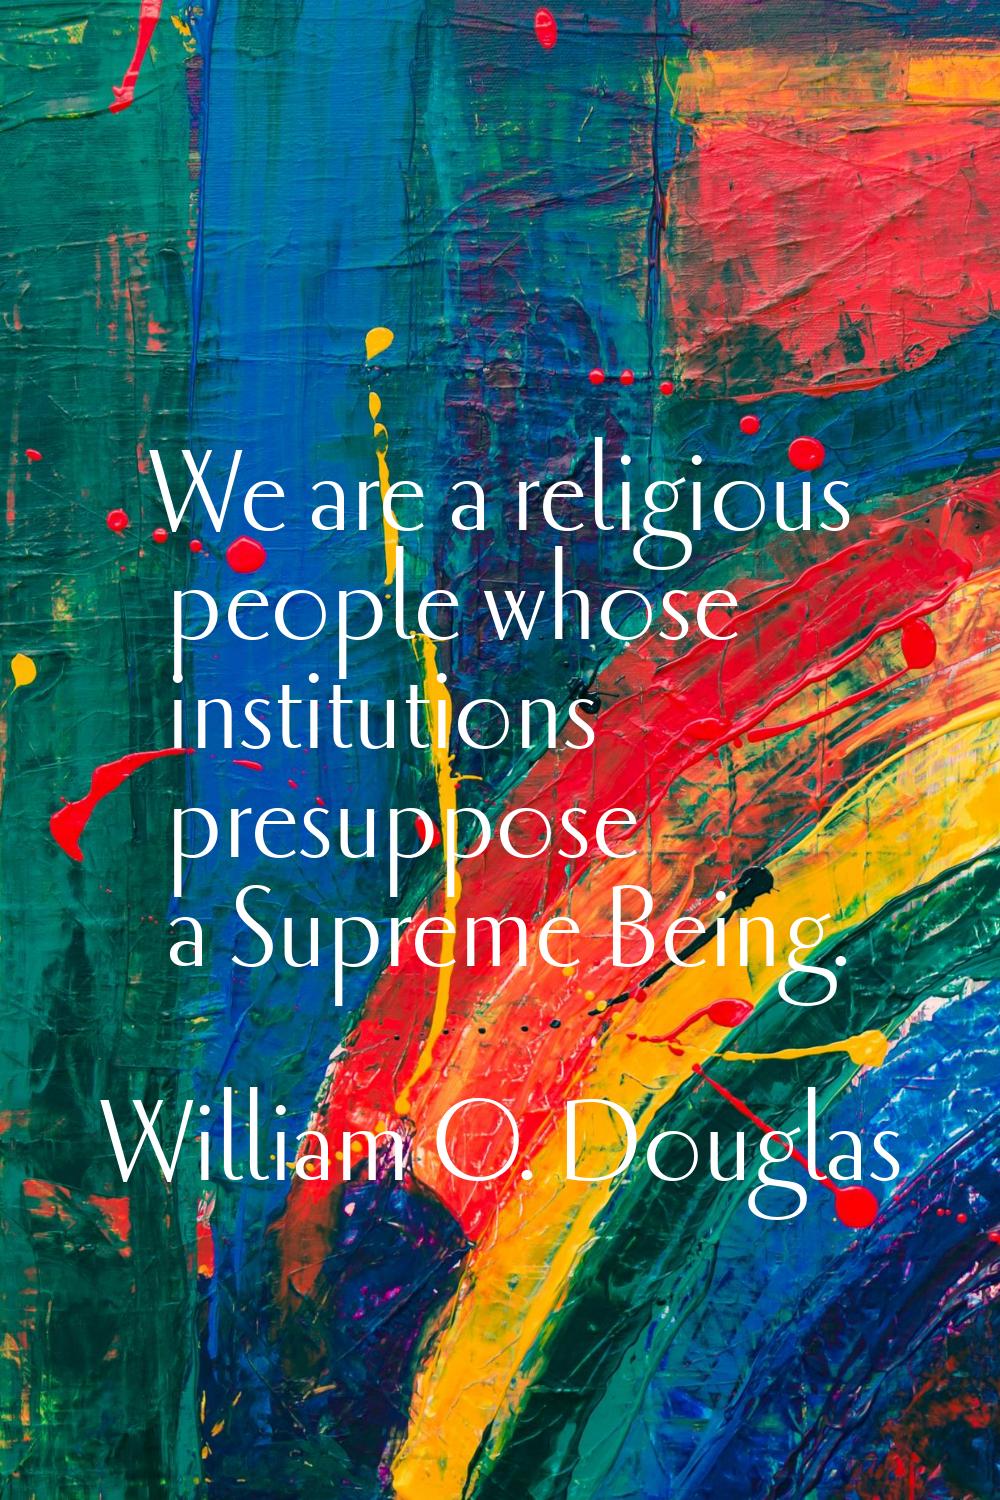 We are a religious people whose institutions presuppose a Supreme Being.